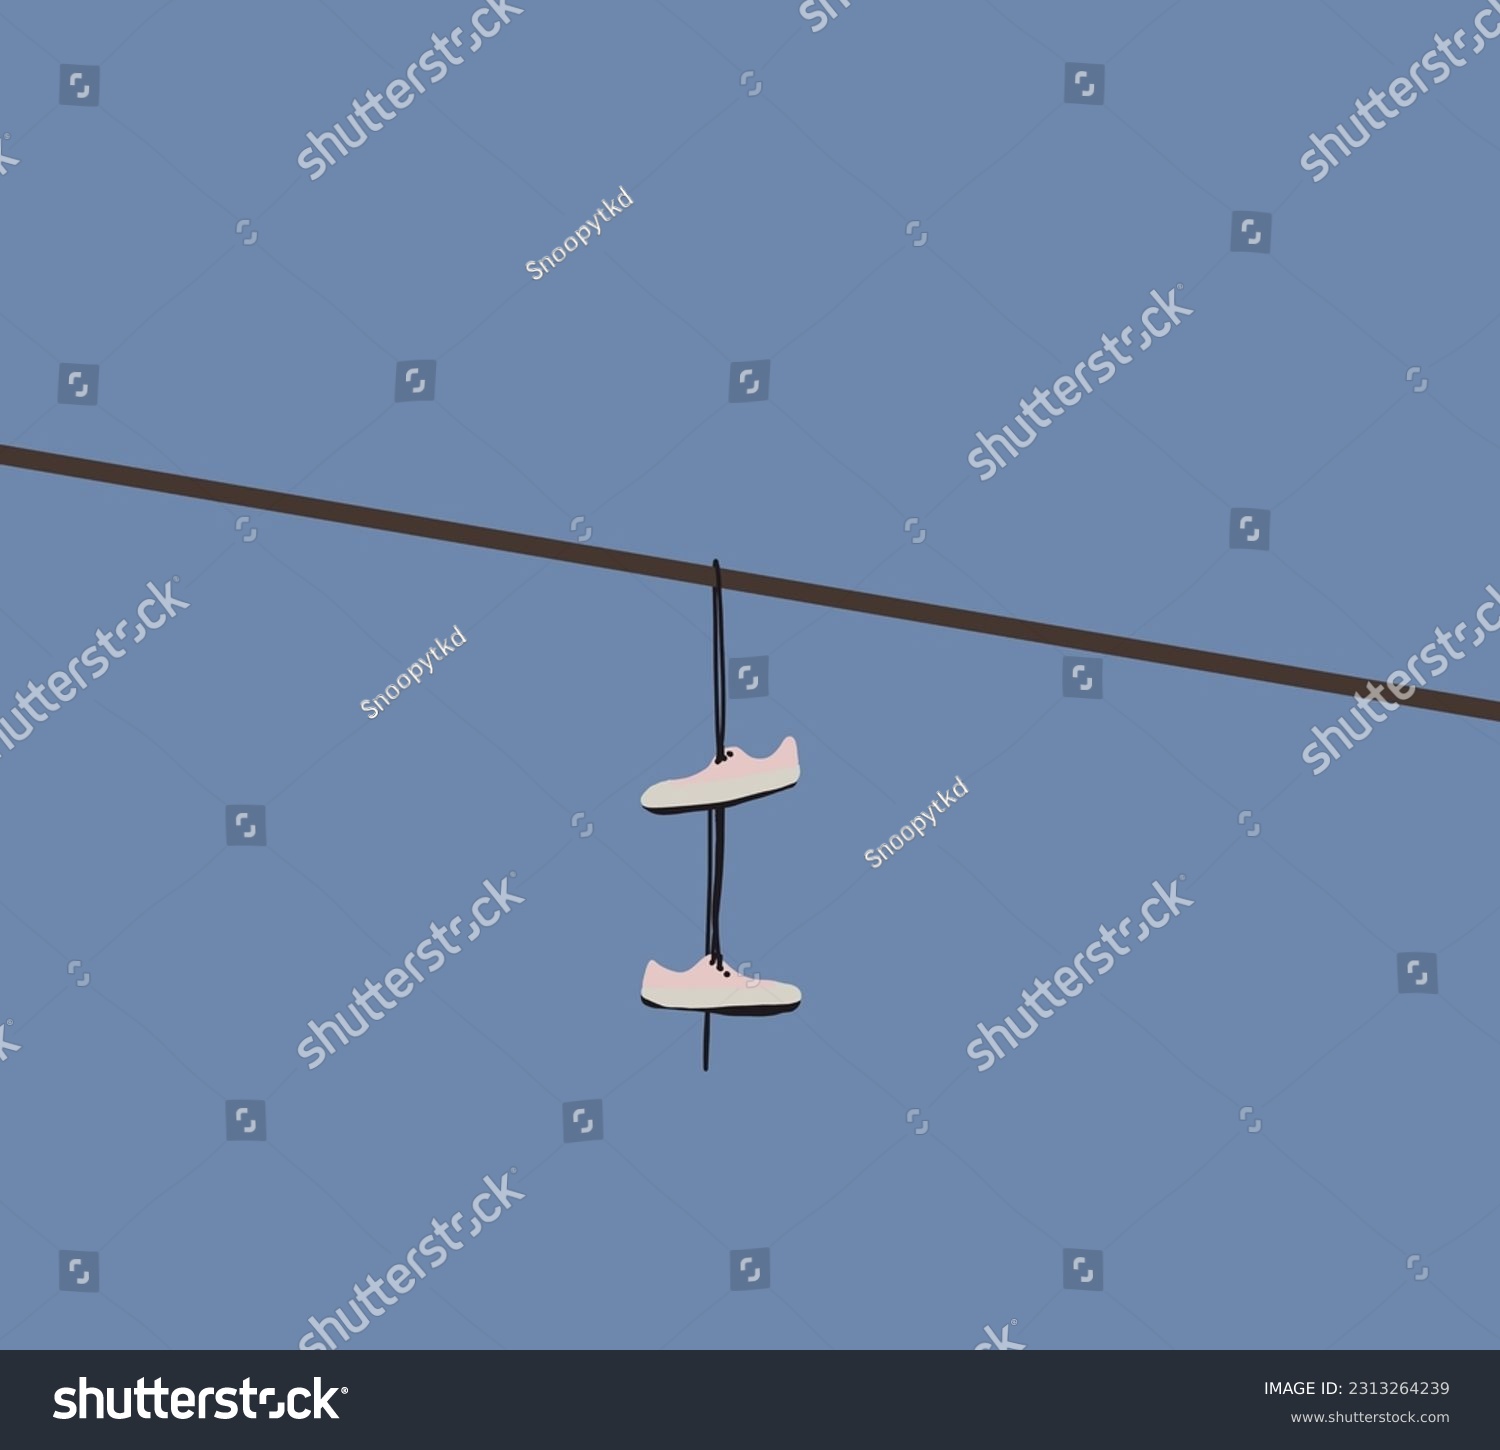 SVG of Pink sneakers hanging on electric wires against a background of blue sky. Close-up, copy space. Urban culture, sale of prohibited substances svg